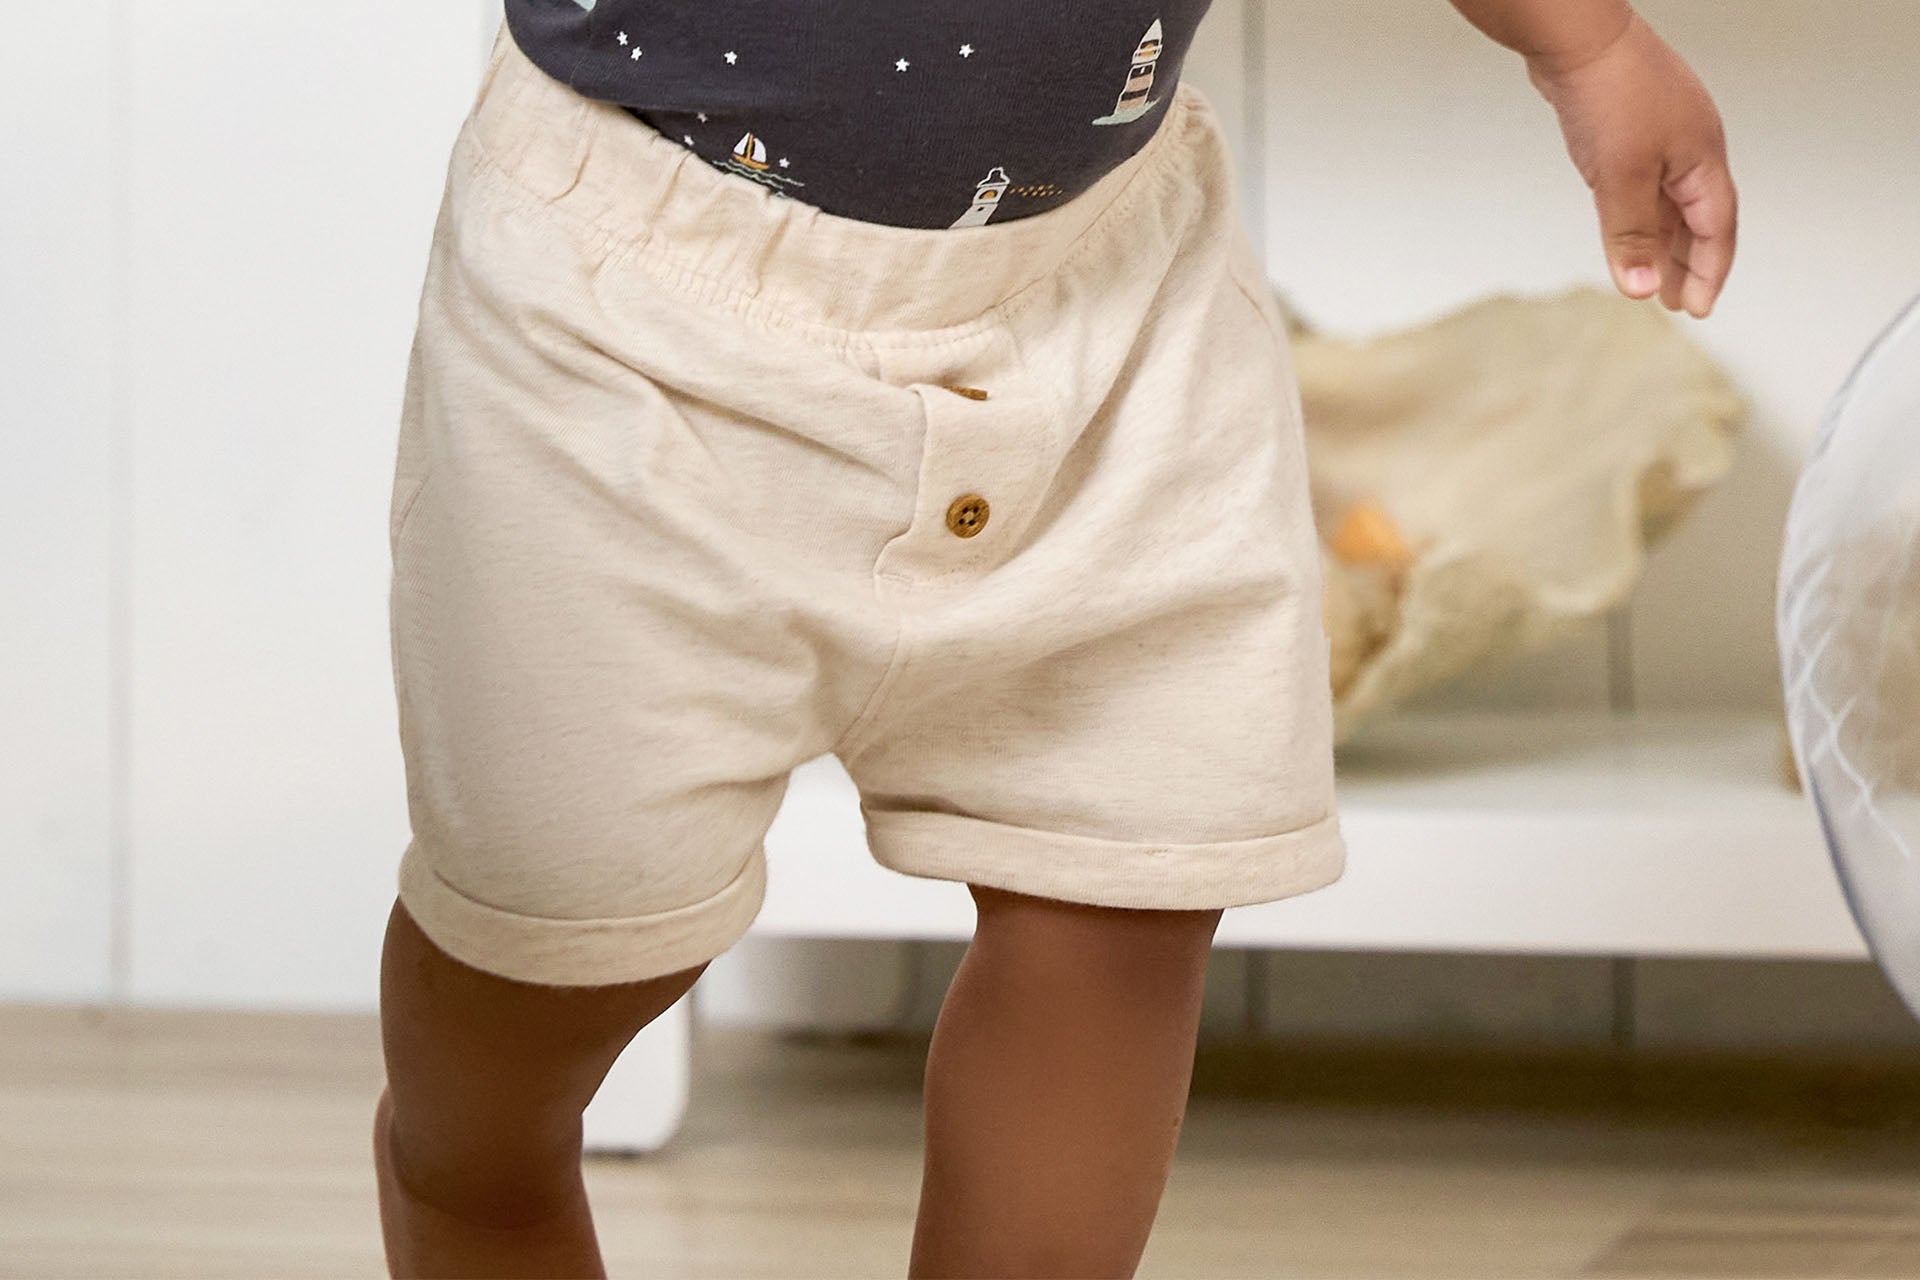 Close-up of a toddler standing in beige shorts and a patterned navy shirt, indoors, with only lower body and legs visible.